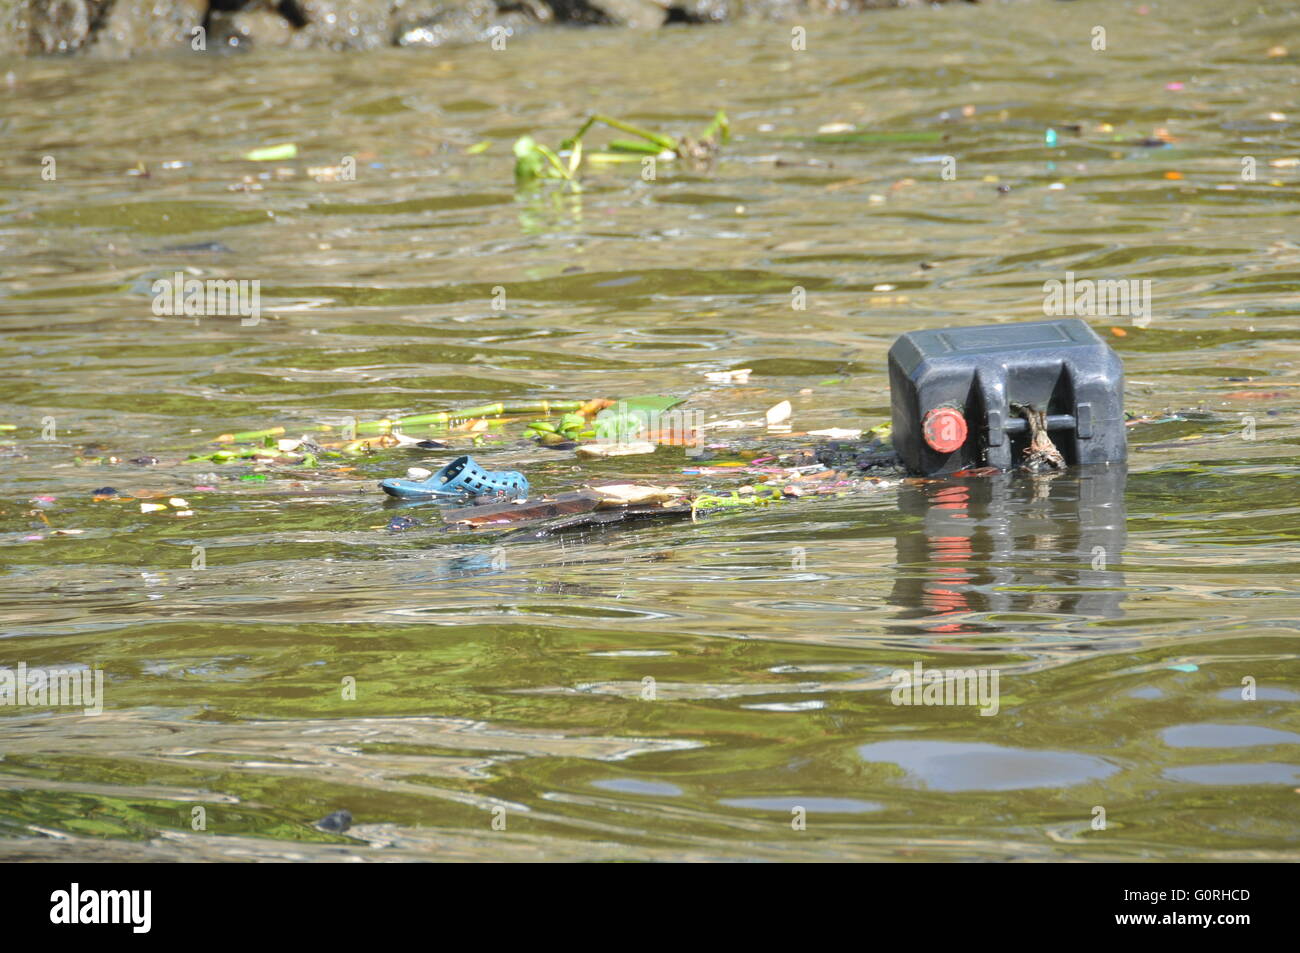 Plastic waste floating down a river causing pollution in a river in Bangkok, Thailand. Stock Photo